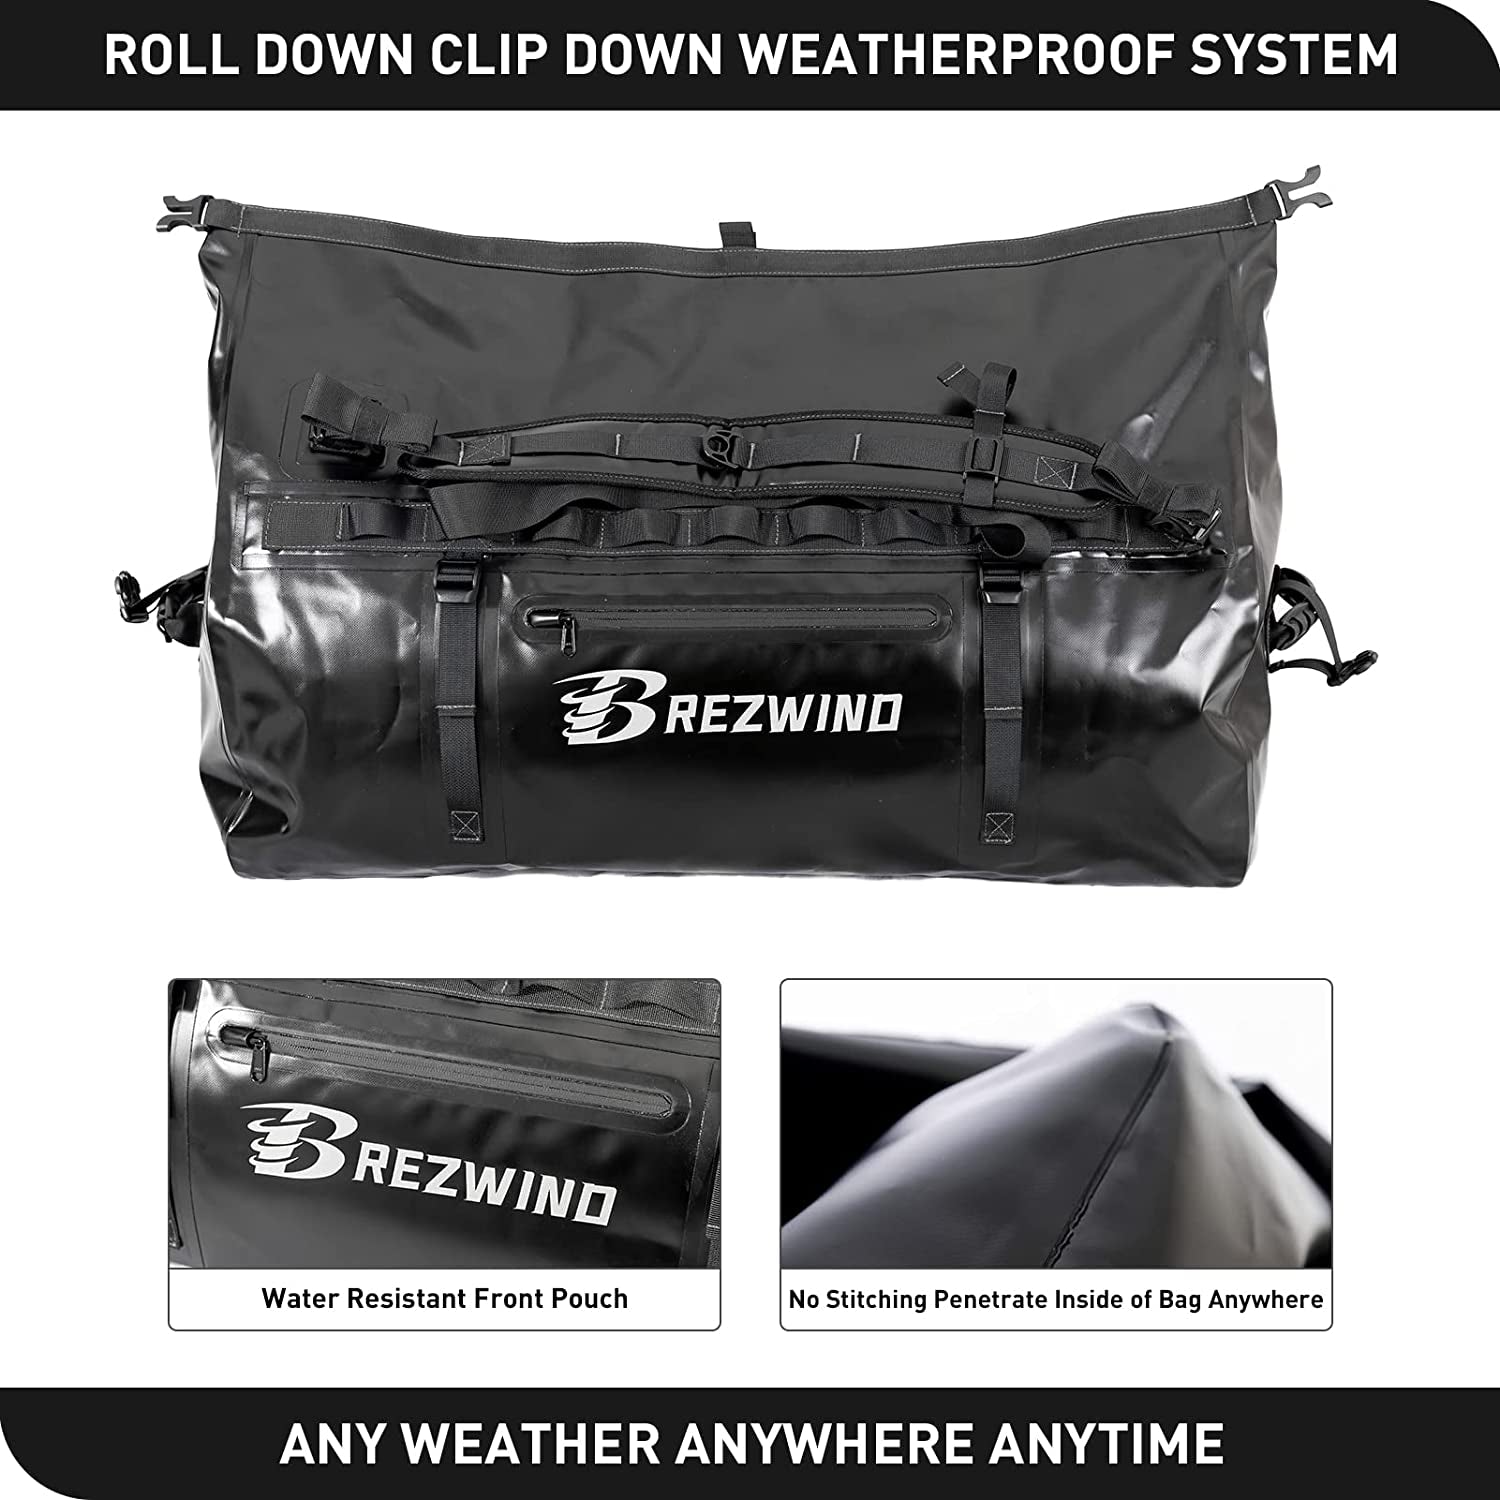 Brezwind Heavy Duty Waterproof Duffel Bag - Large Capacity, Durable Straps and Handles, Perfect for Boating, Motorcycling, Hunting, Camping, Kayaks, Jet Ski and Any Kind of Travel